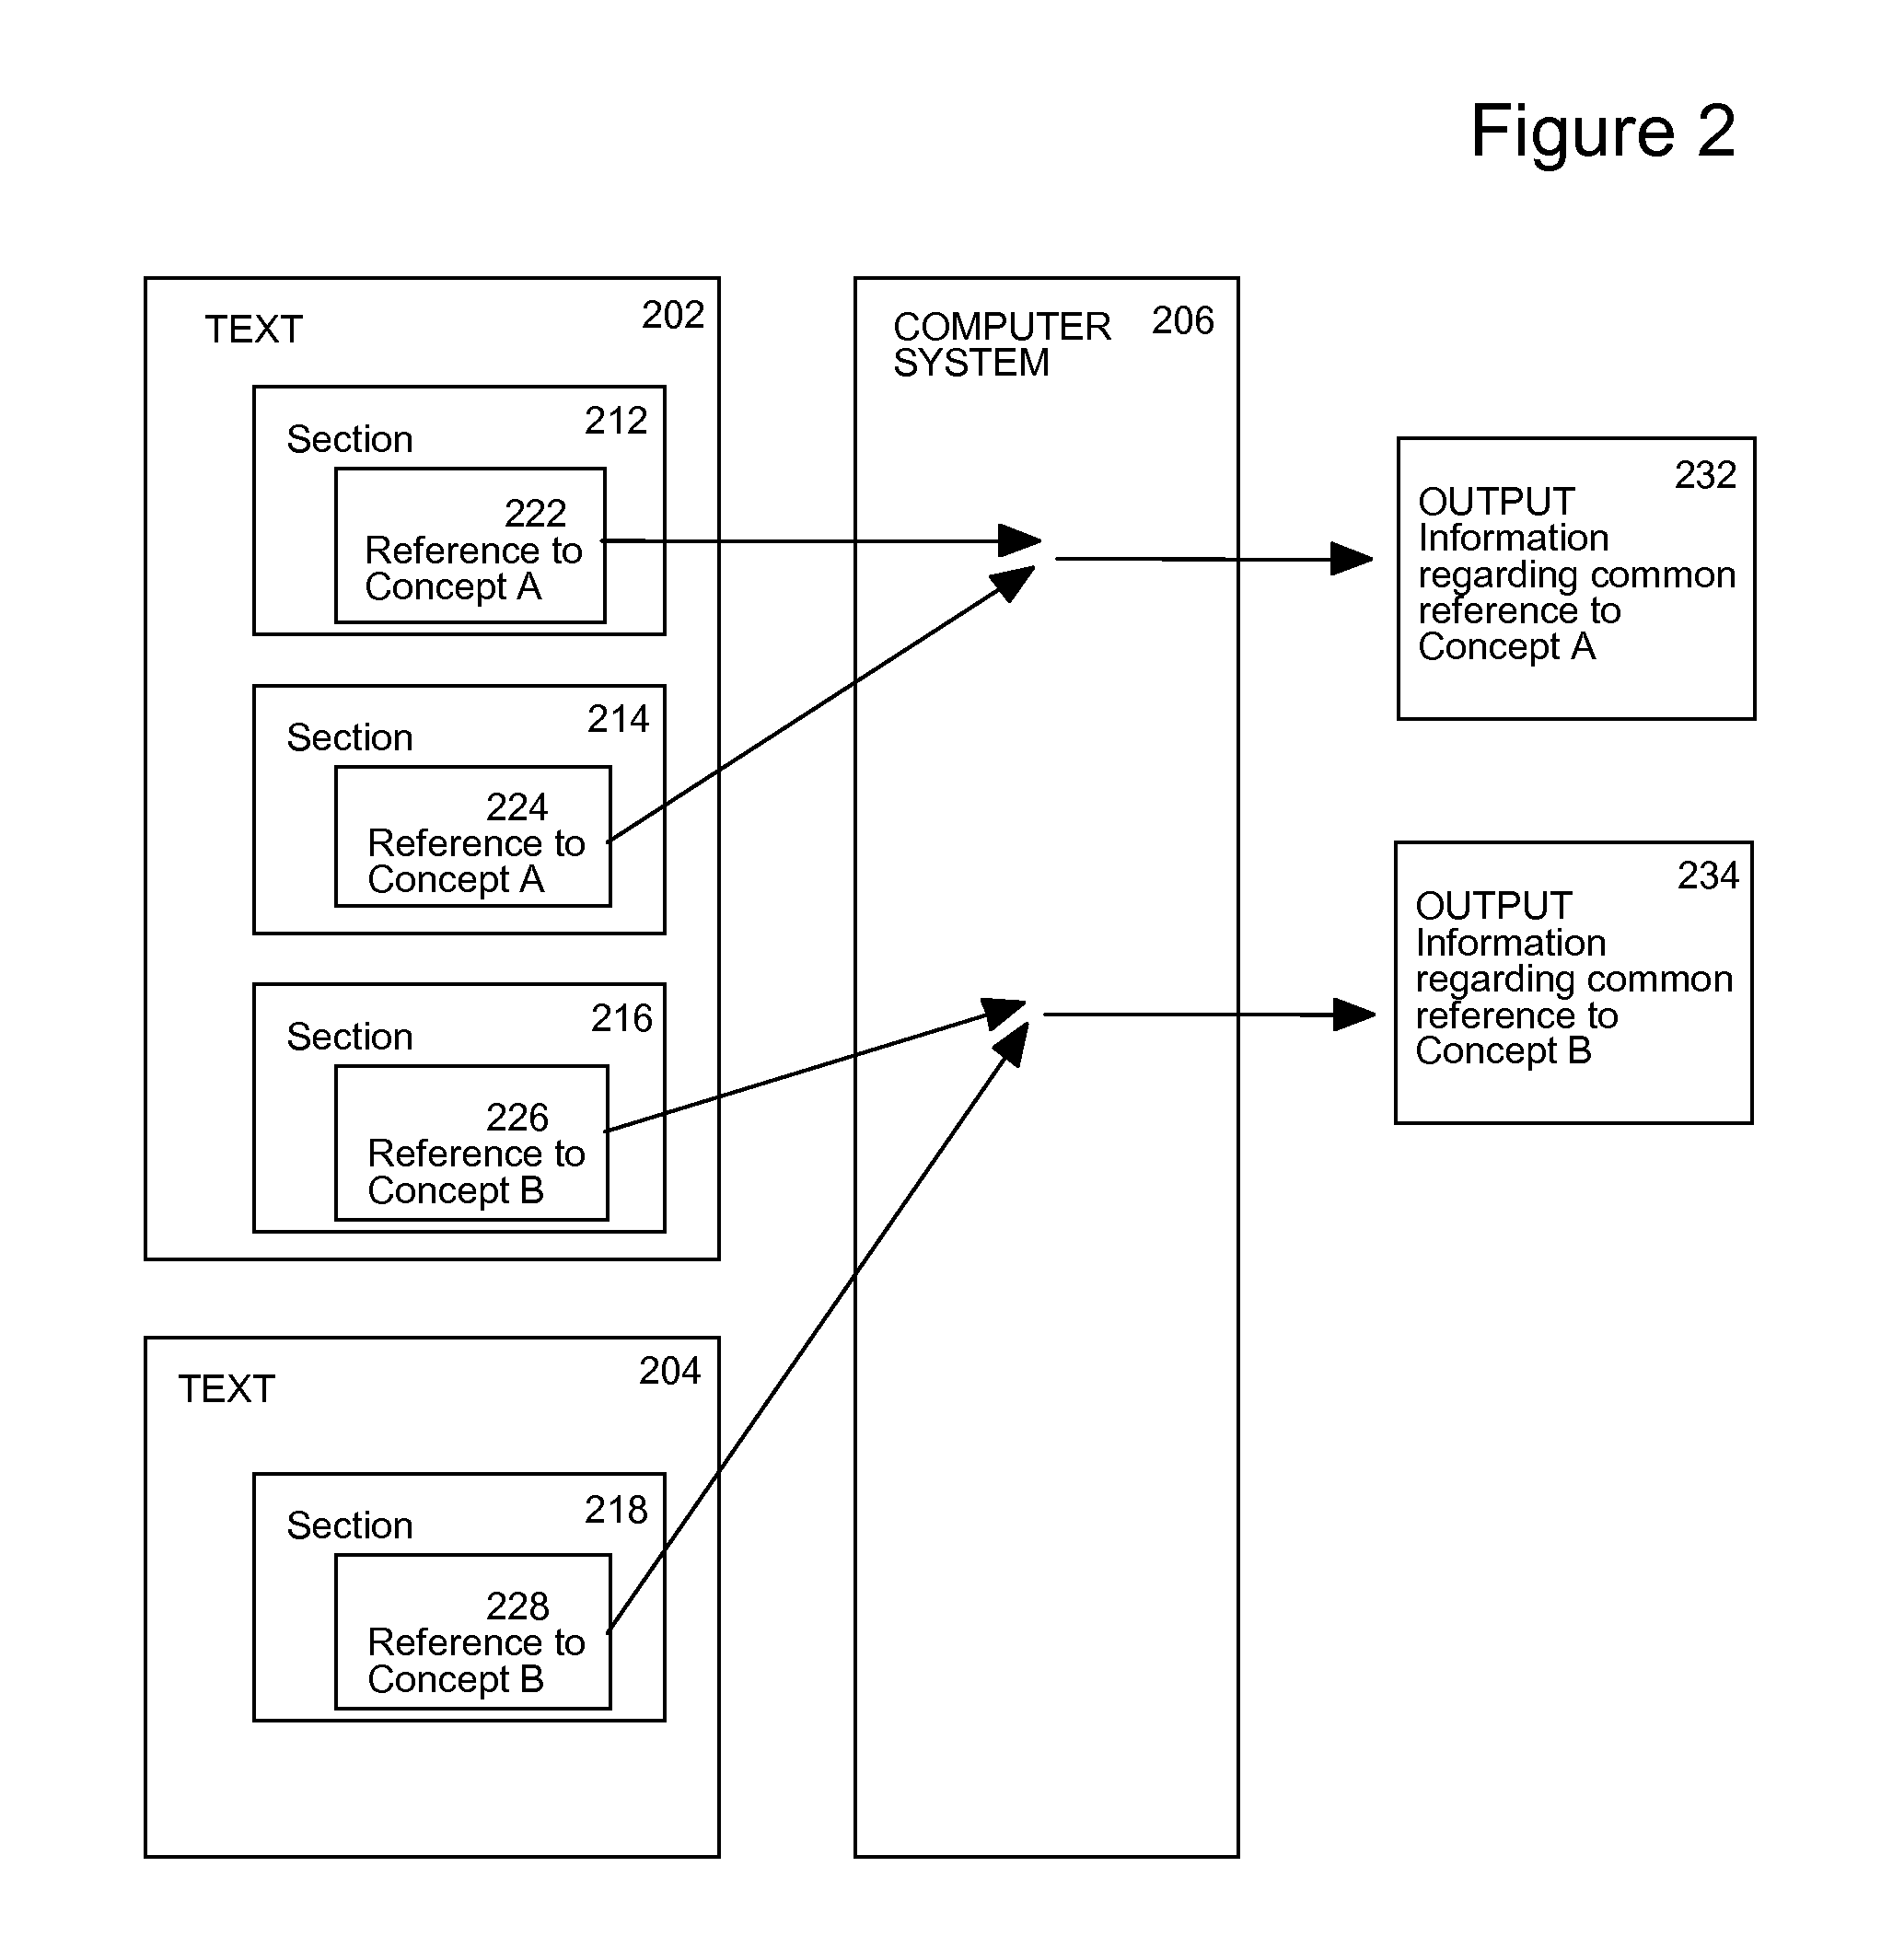 Method and apparatus for enhancing electronic reading by identifying relationships between sections of electronic text